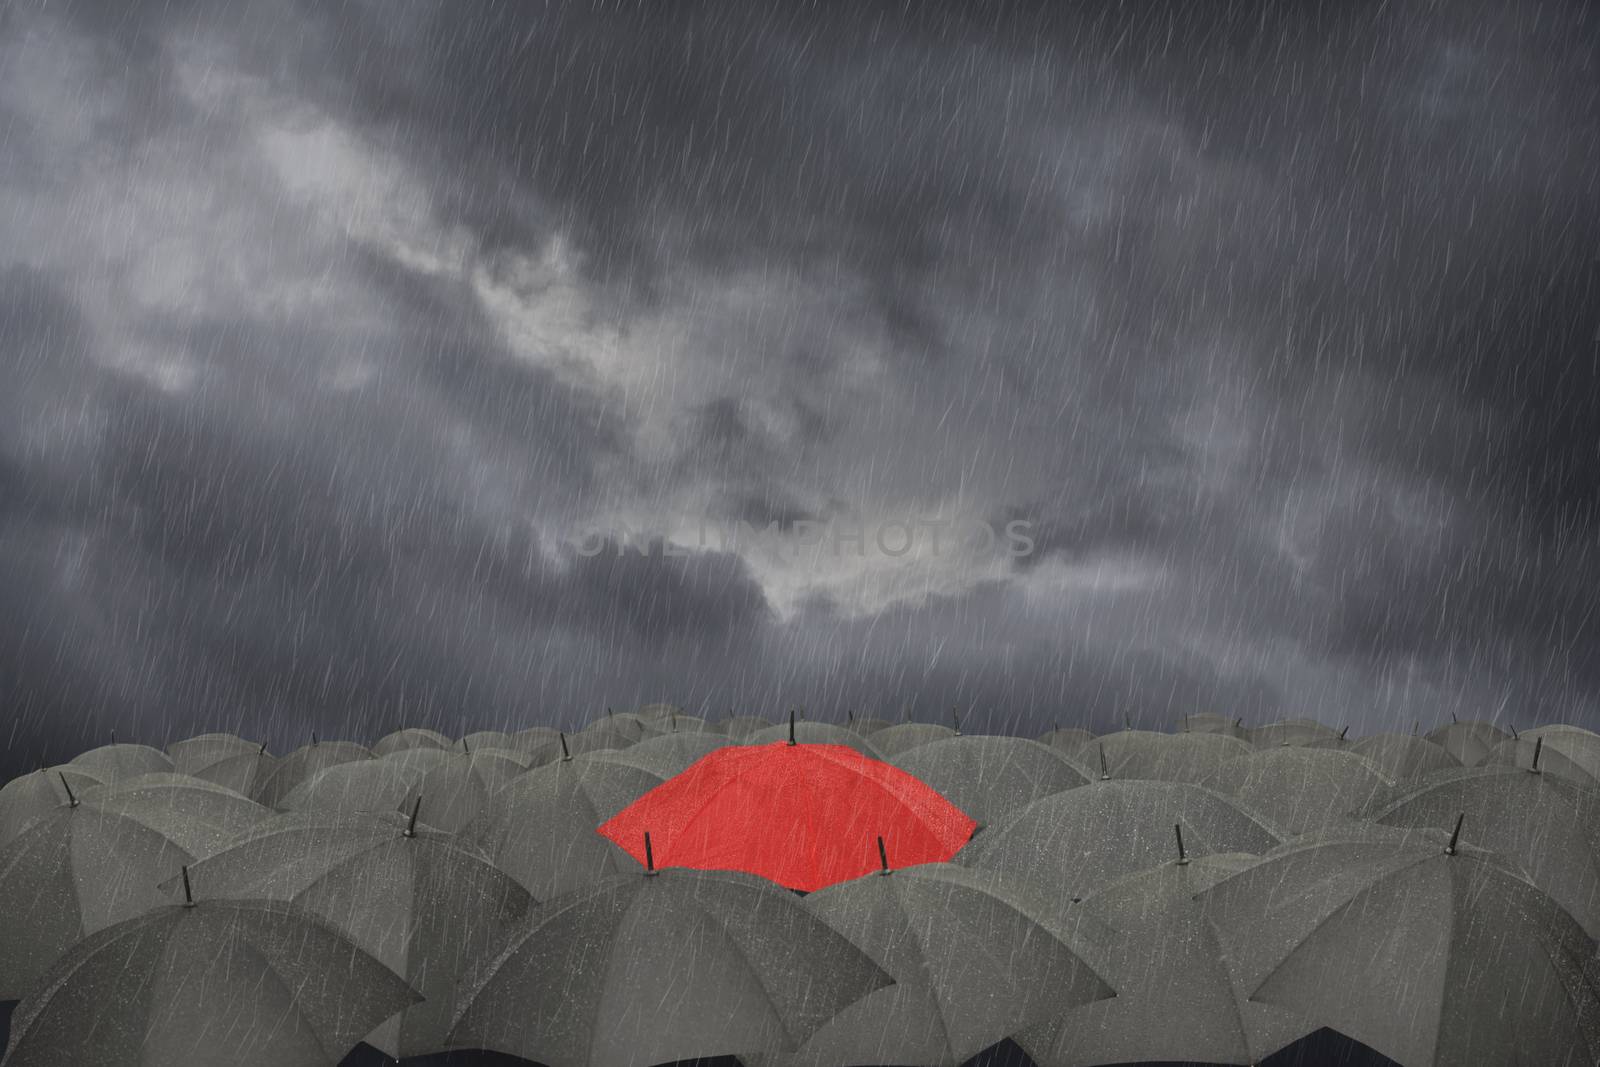 A red Umbrella surrounded by a collection of black umbrellas in the rain